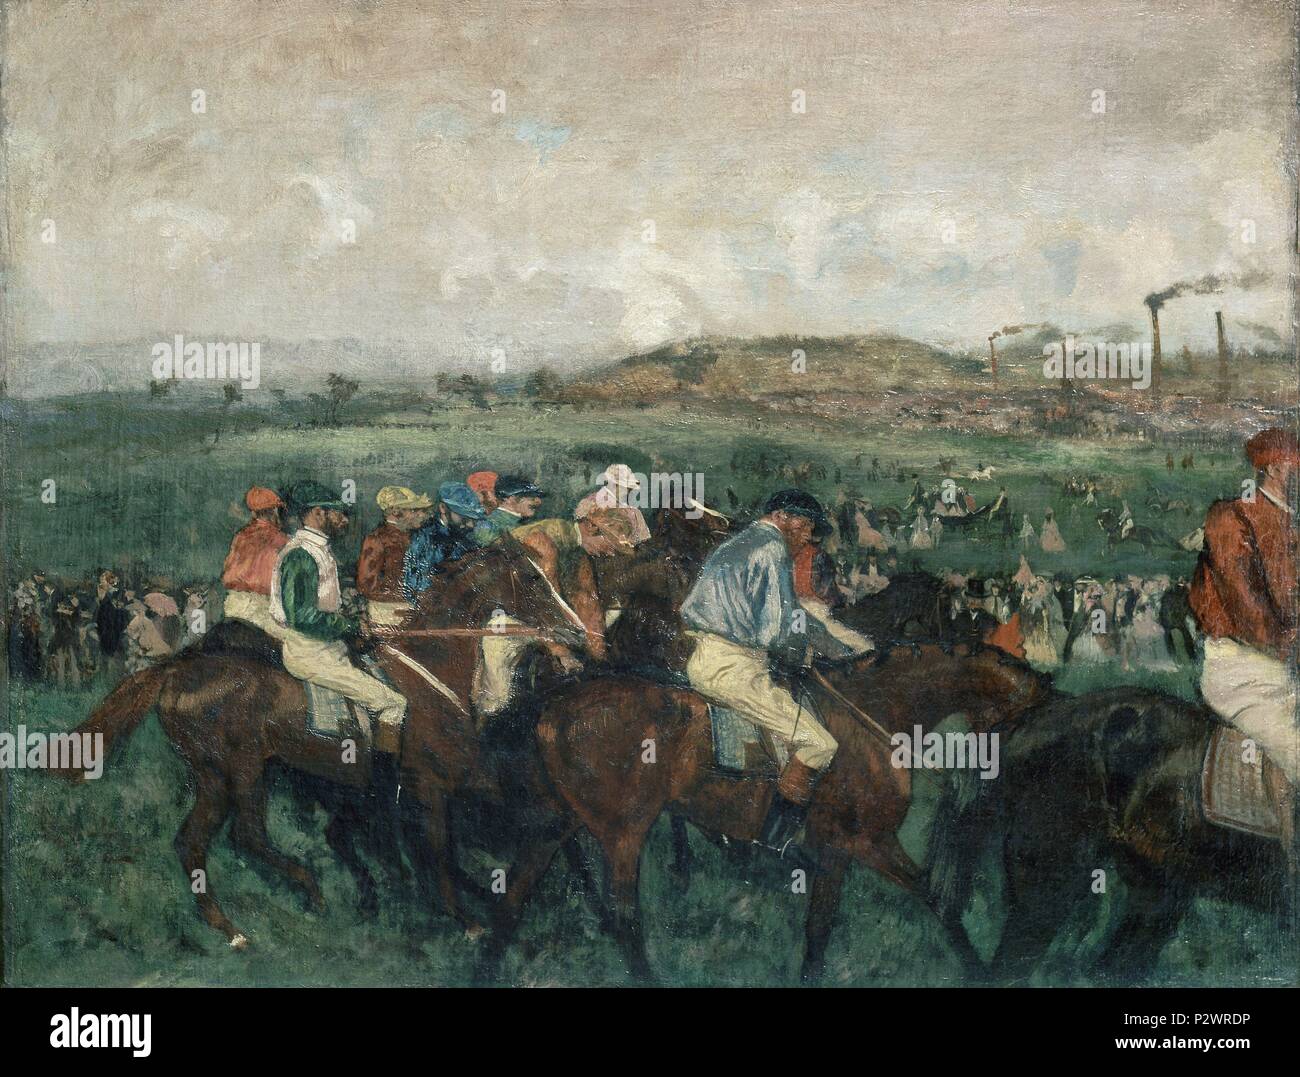 Gentlemen race. Before the Departure - 1862 - 48,5x61,5 cm - oil on canvas. Author: Edgar Degas (1834-1917). Location: MUSEE D'ORSAY, FRANCE. Also known as: CARRERA DE CABALLOS. Stock Photo